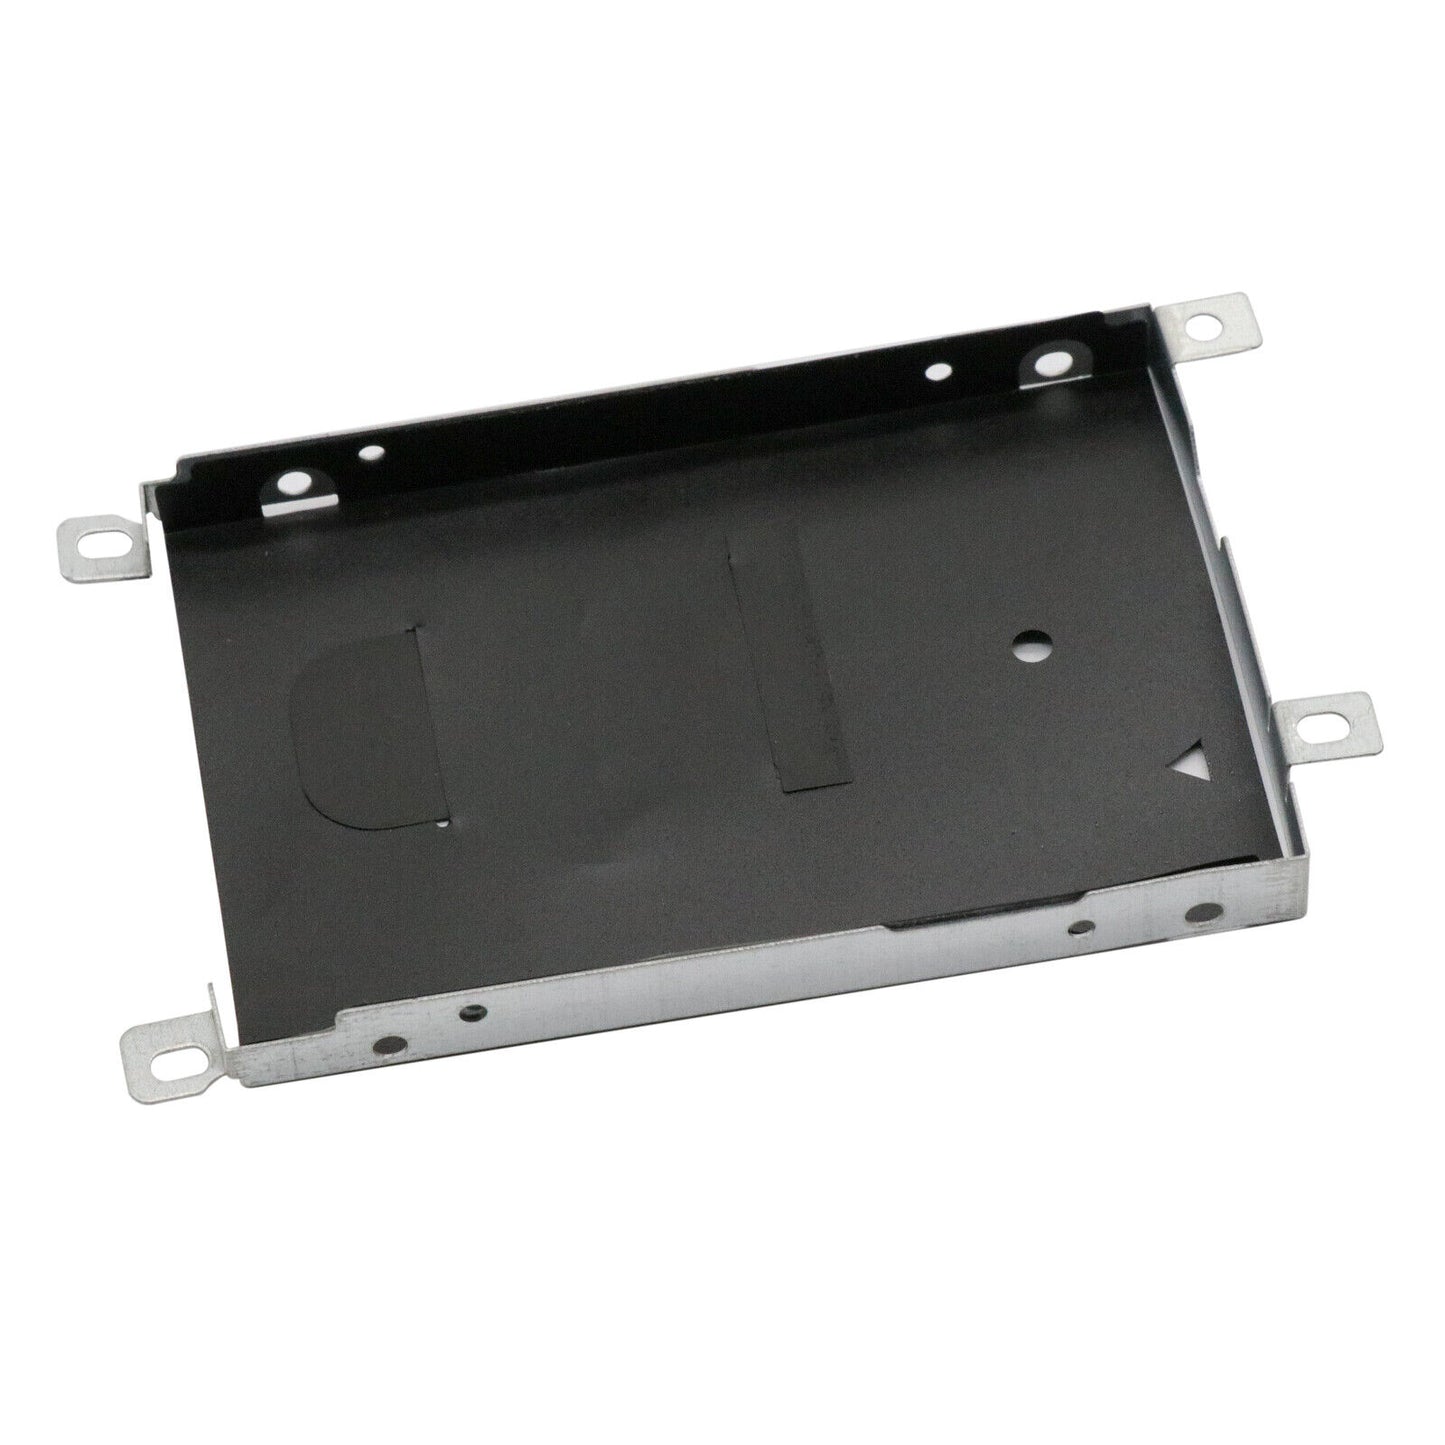 HP New Hard Drive HDD SSD Tray Caddy Carrier Bracket with Screws ProBook 450 455 470 475 G3 828147-001